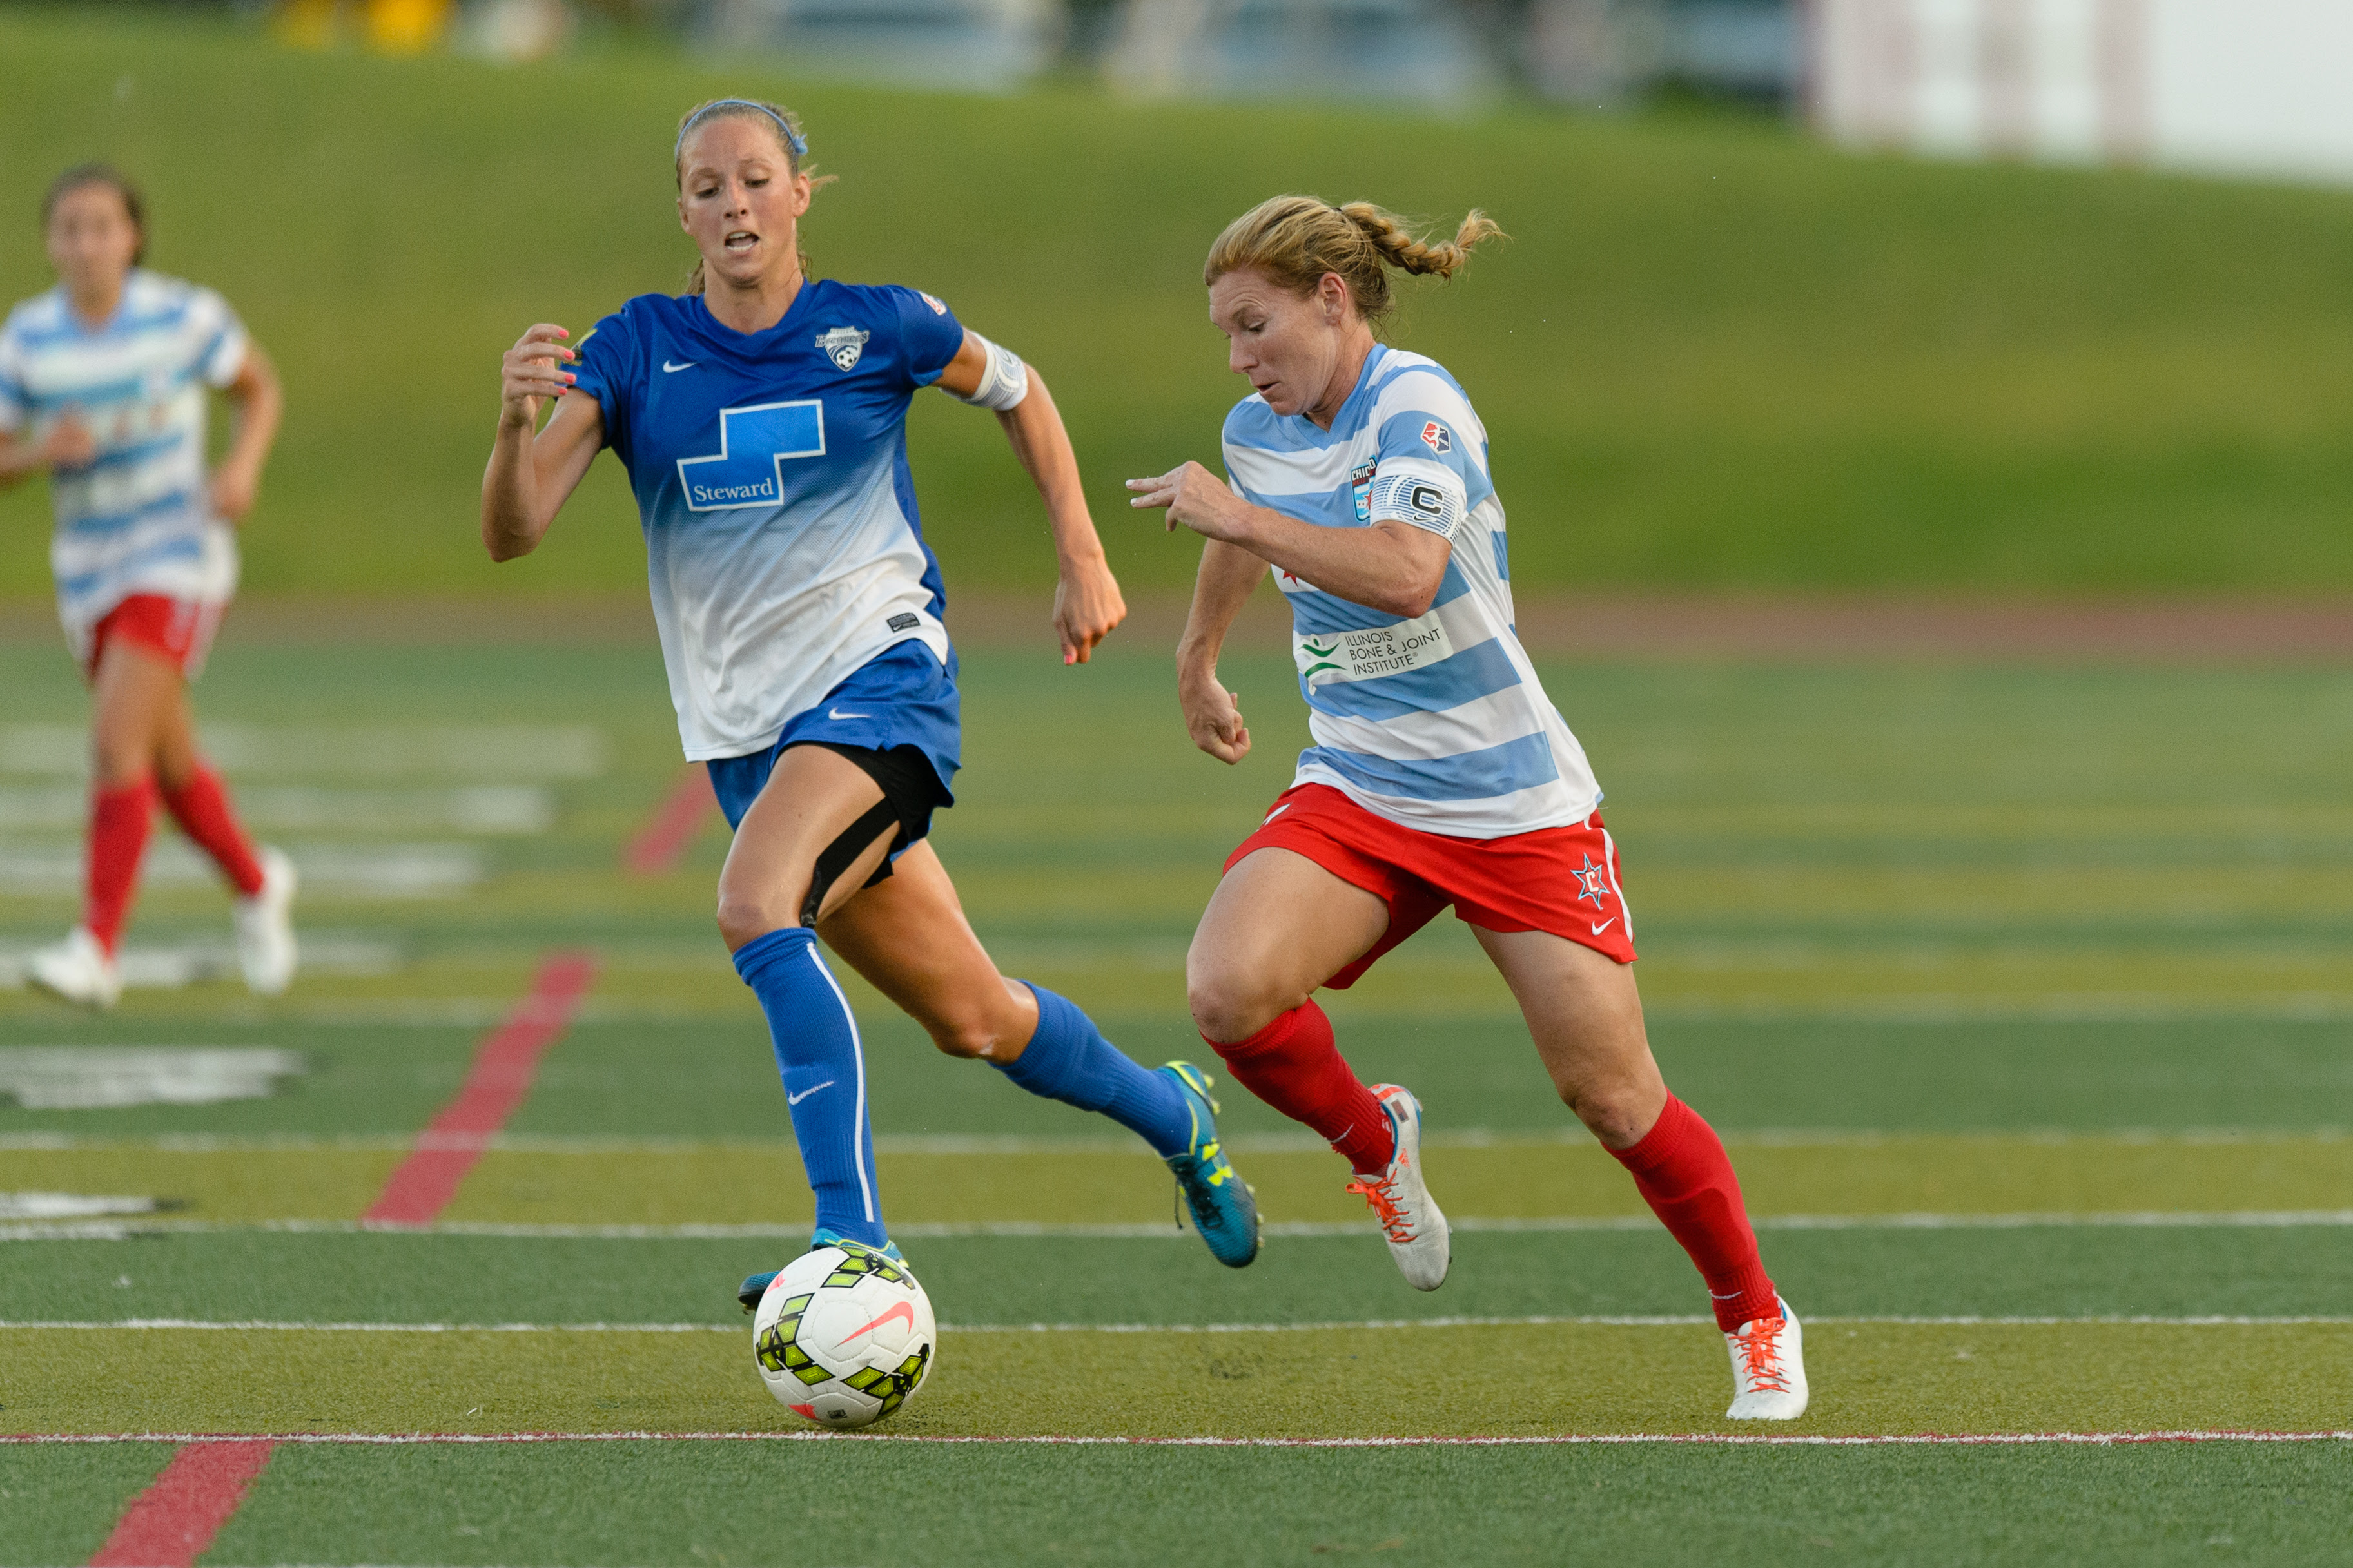 Lisle, IL, USA, July 18, 2015: The Boston Breakers versus the Chicago Red Stars in a National Women's Soccer League game at Benedictine University. Photo by Daniel Bartel